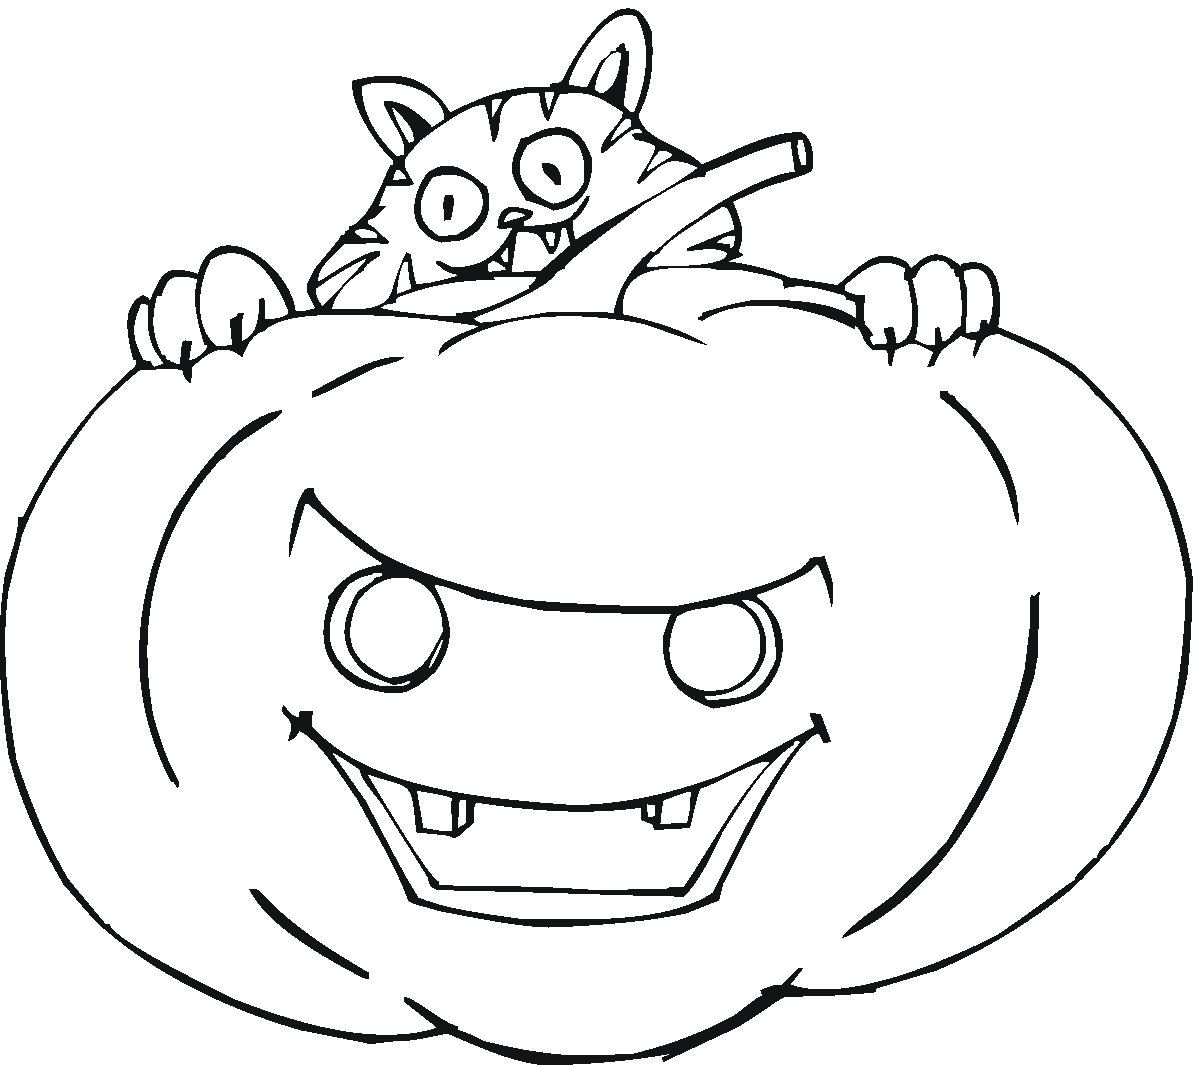 halloween pumpkins to color and print free printable pumpkin coloring pages for kids print to halloween pumpkins and color 